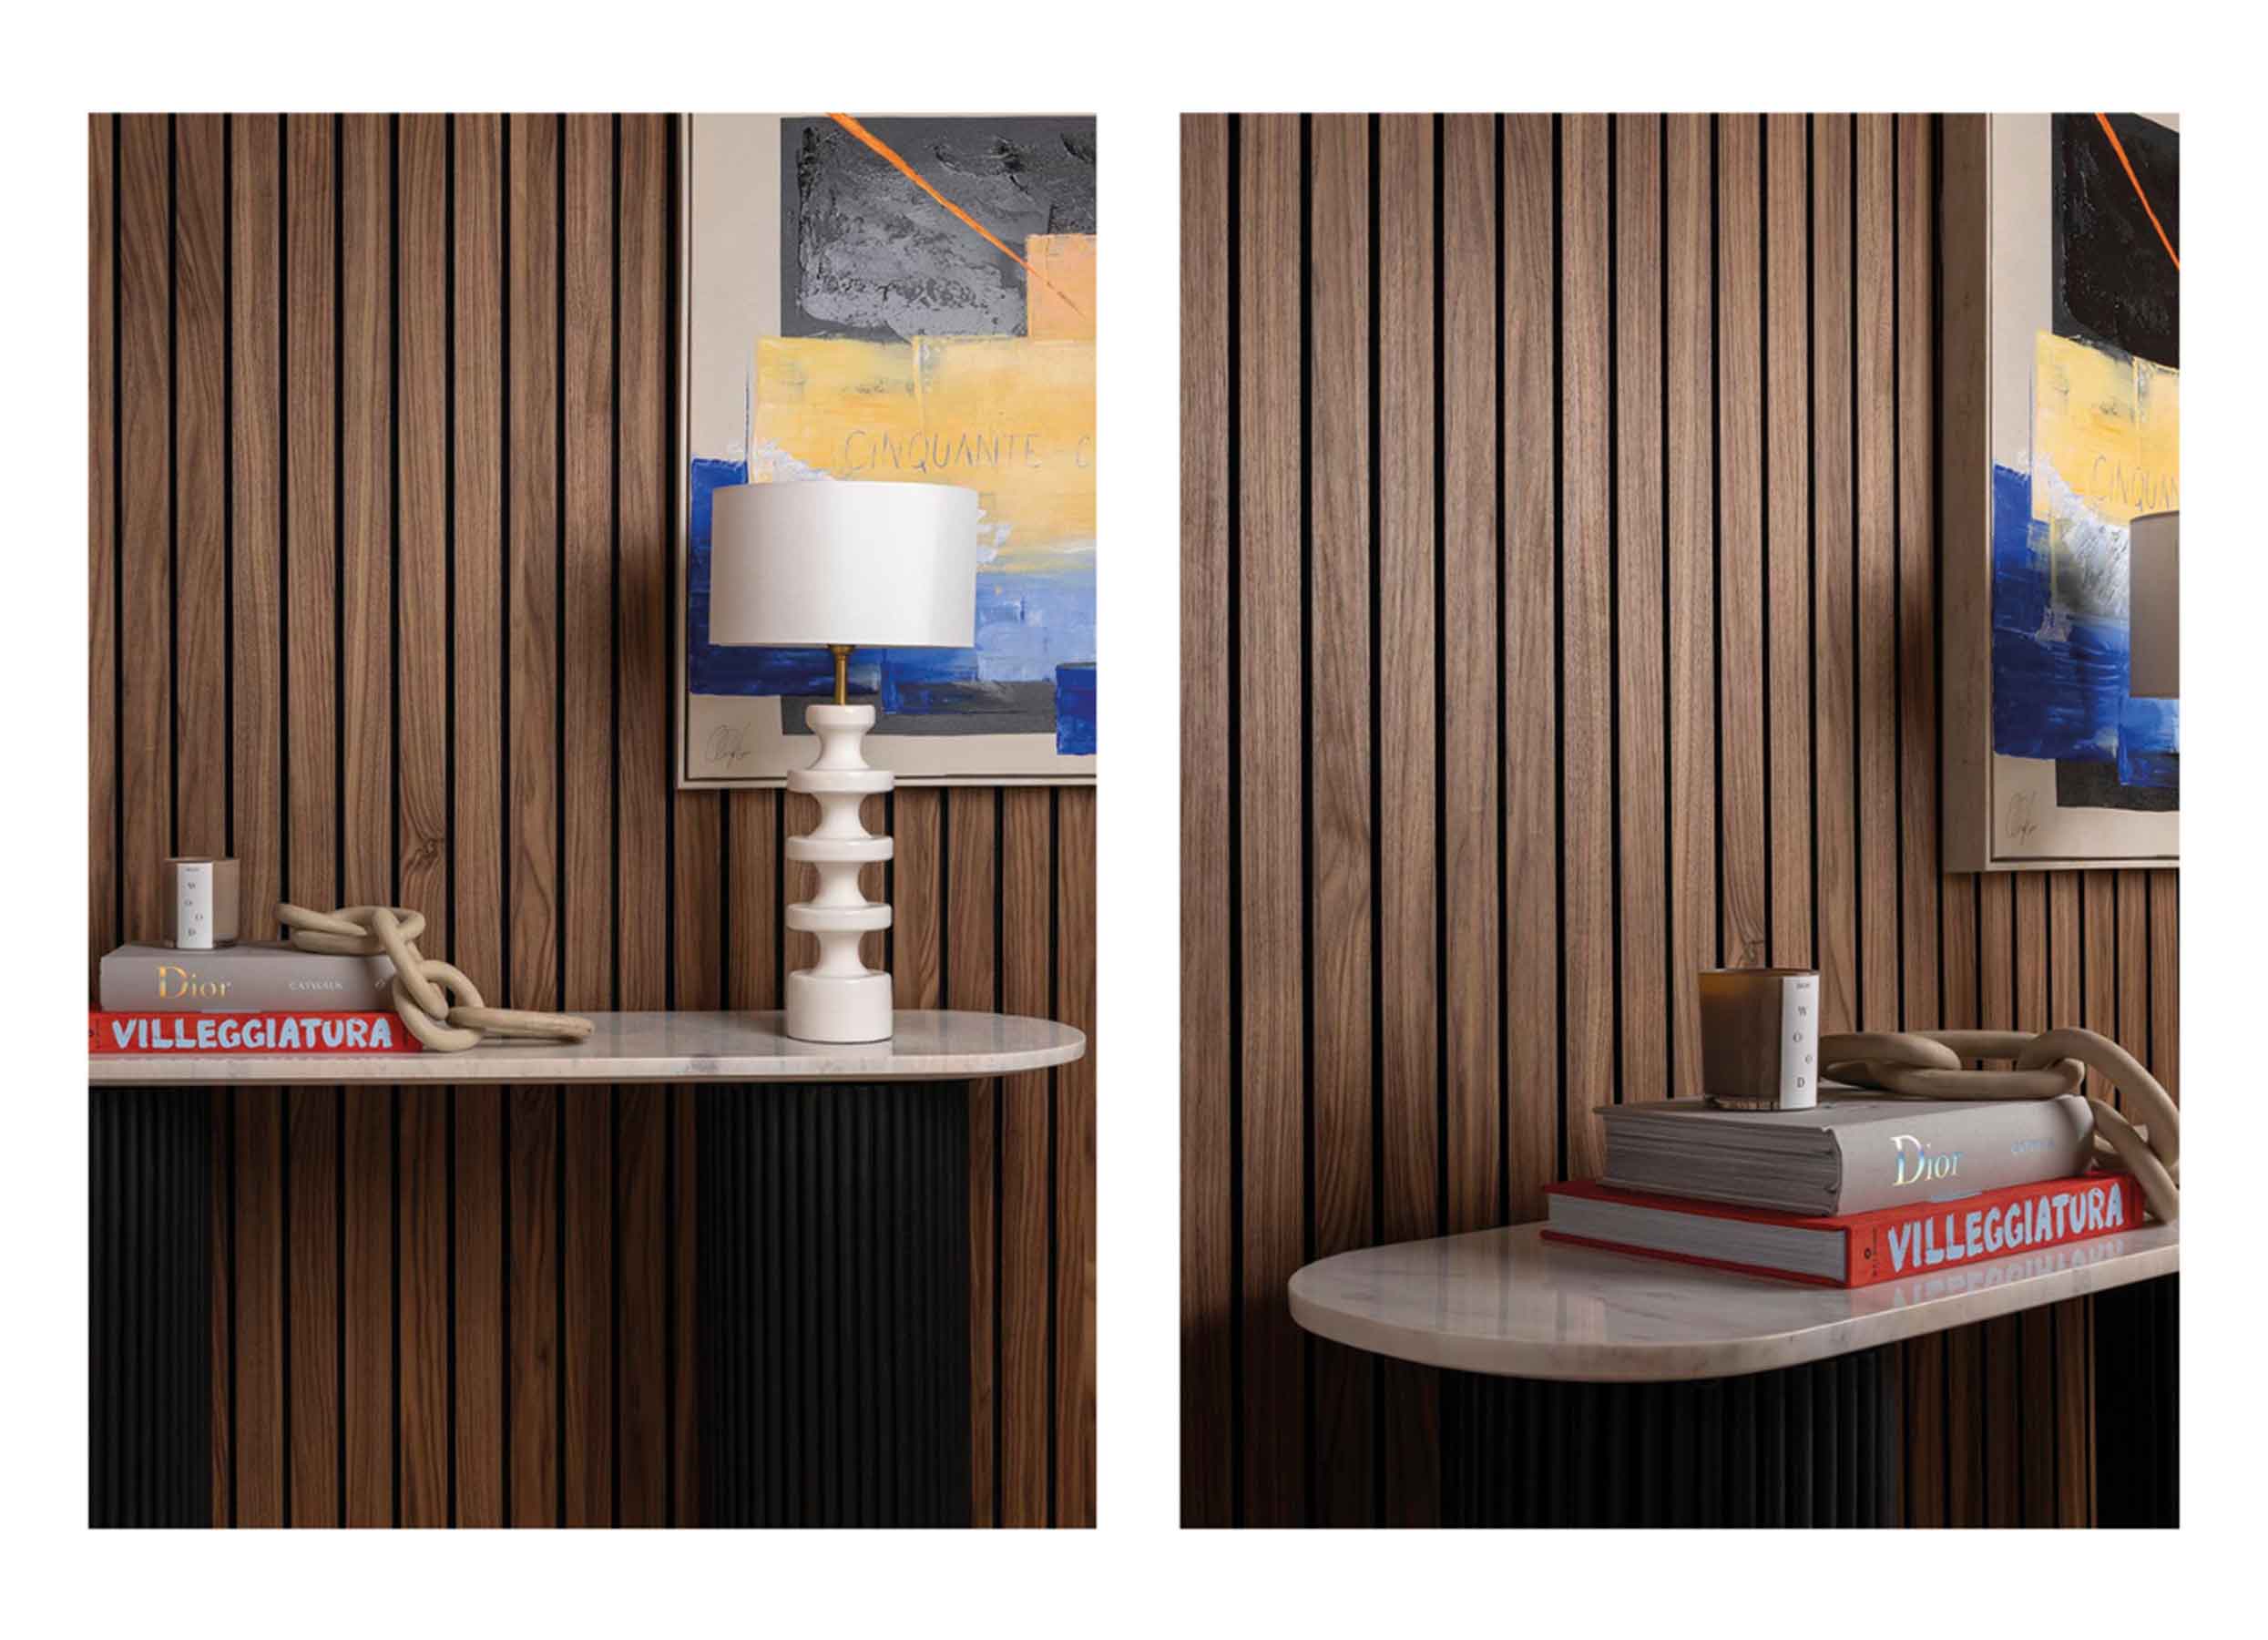 Brown slat wood panelling behind abstract wall art and a console table with books, a candle, decorative chain and white lamp.